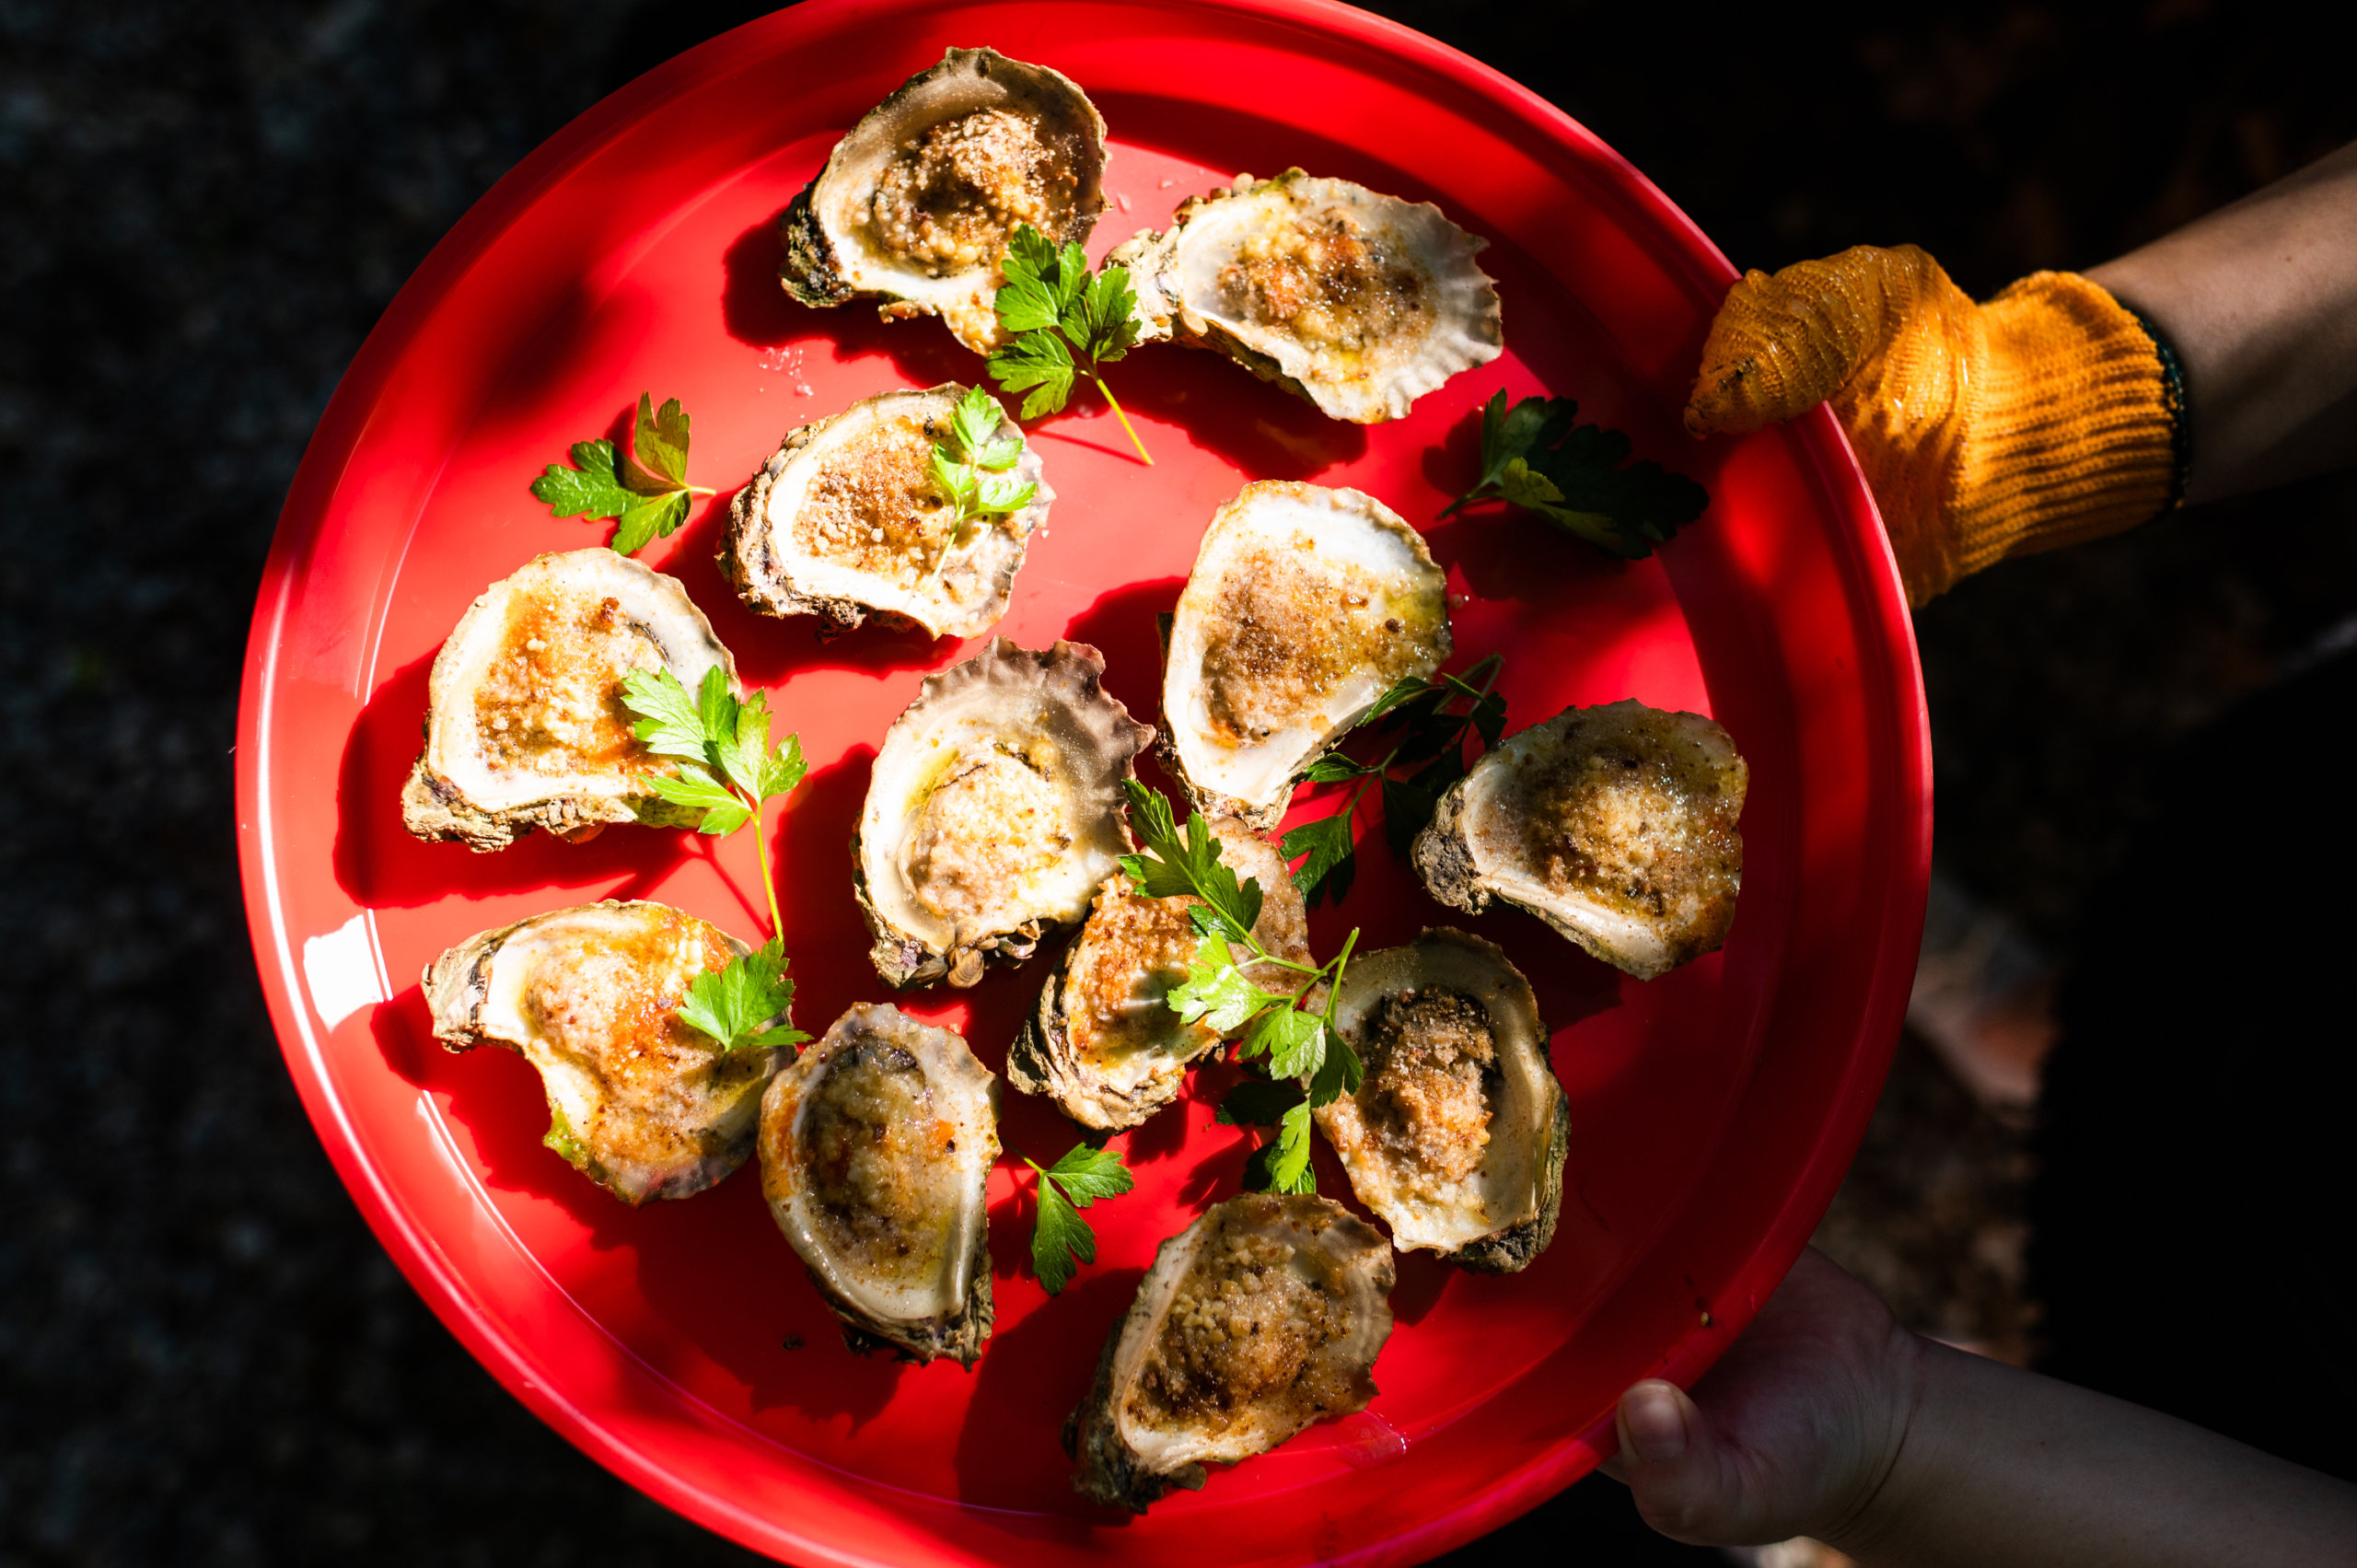 Smoked oysters Rockefeller